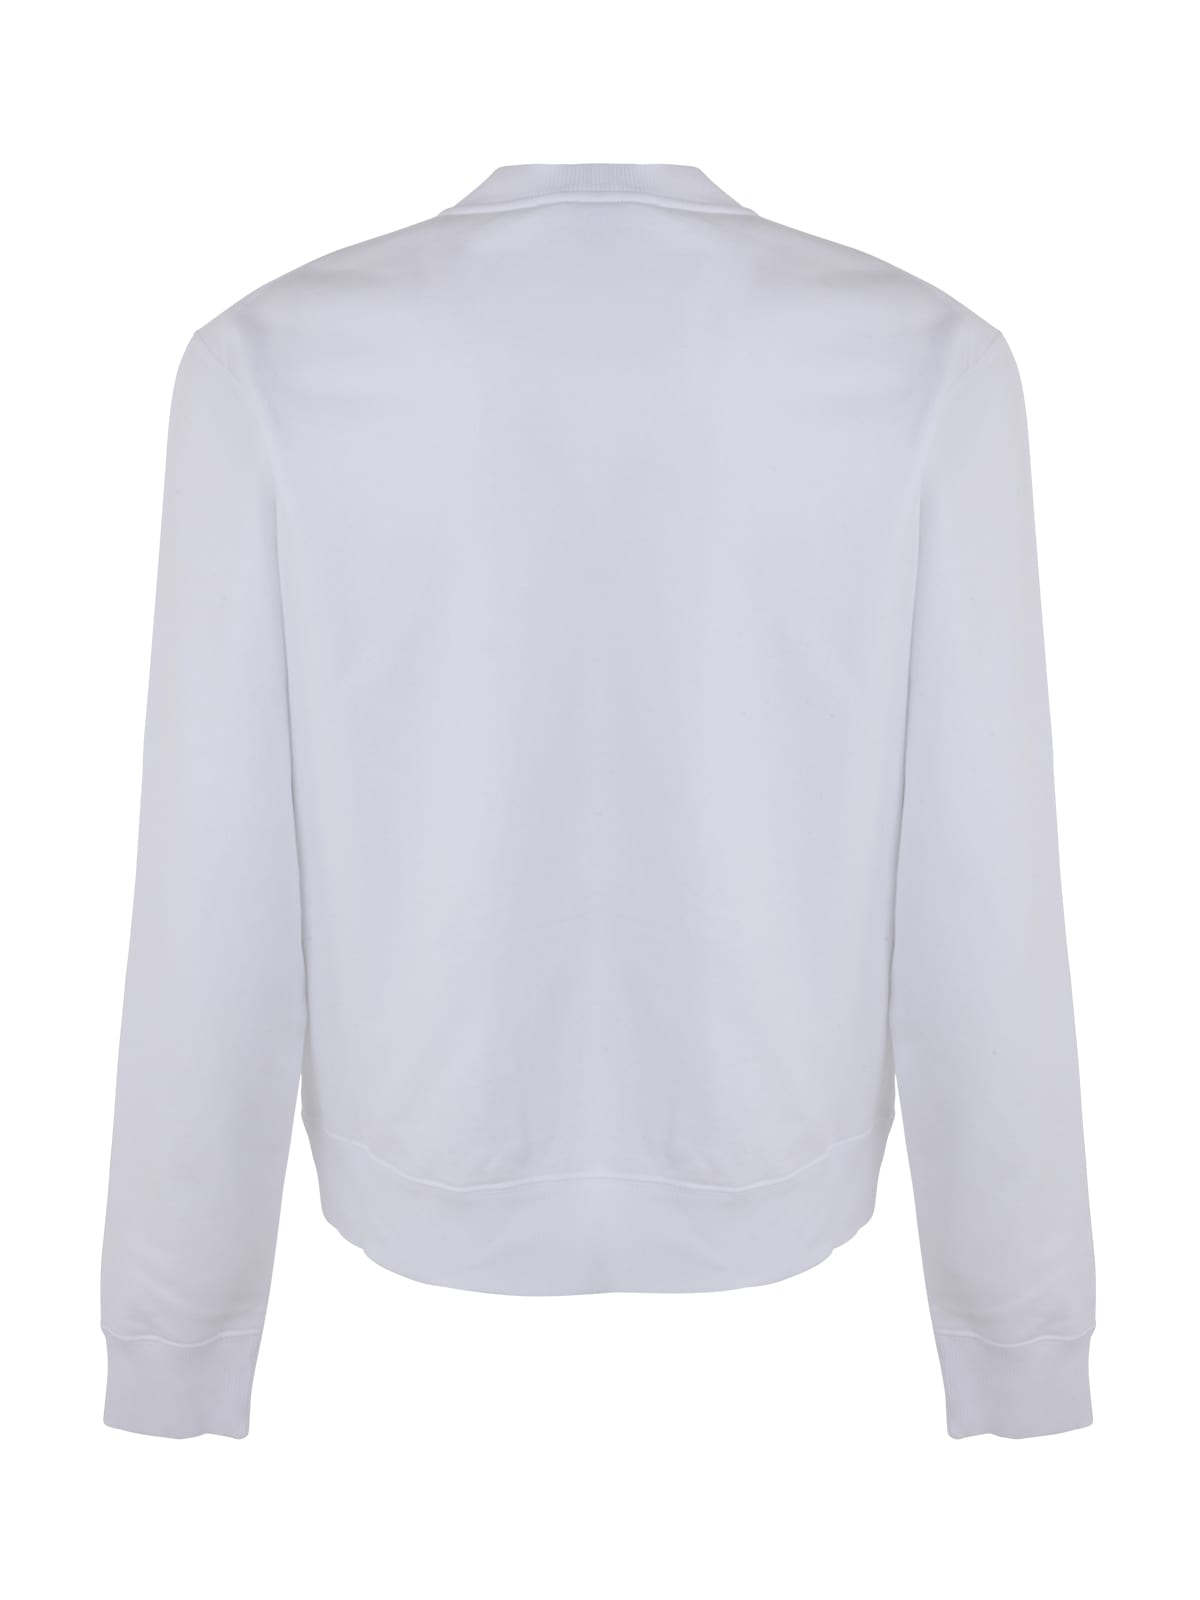 Shop Lanvin Sweat Shirt Embrodery In Optic White